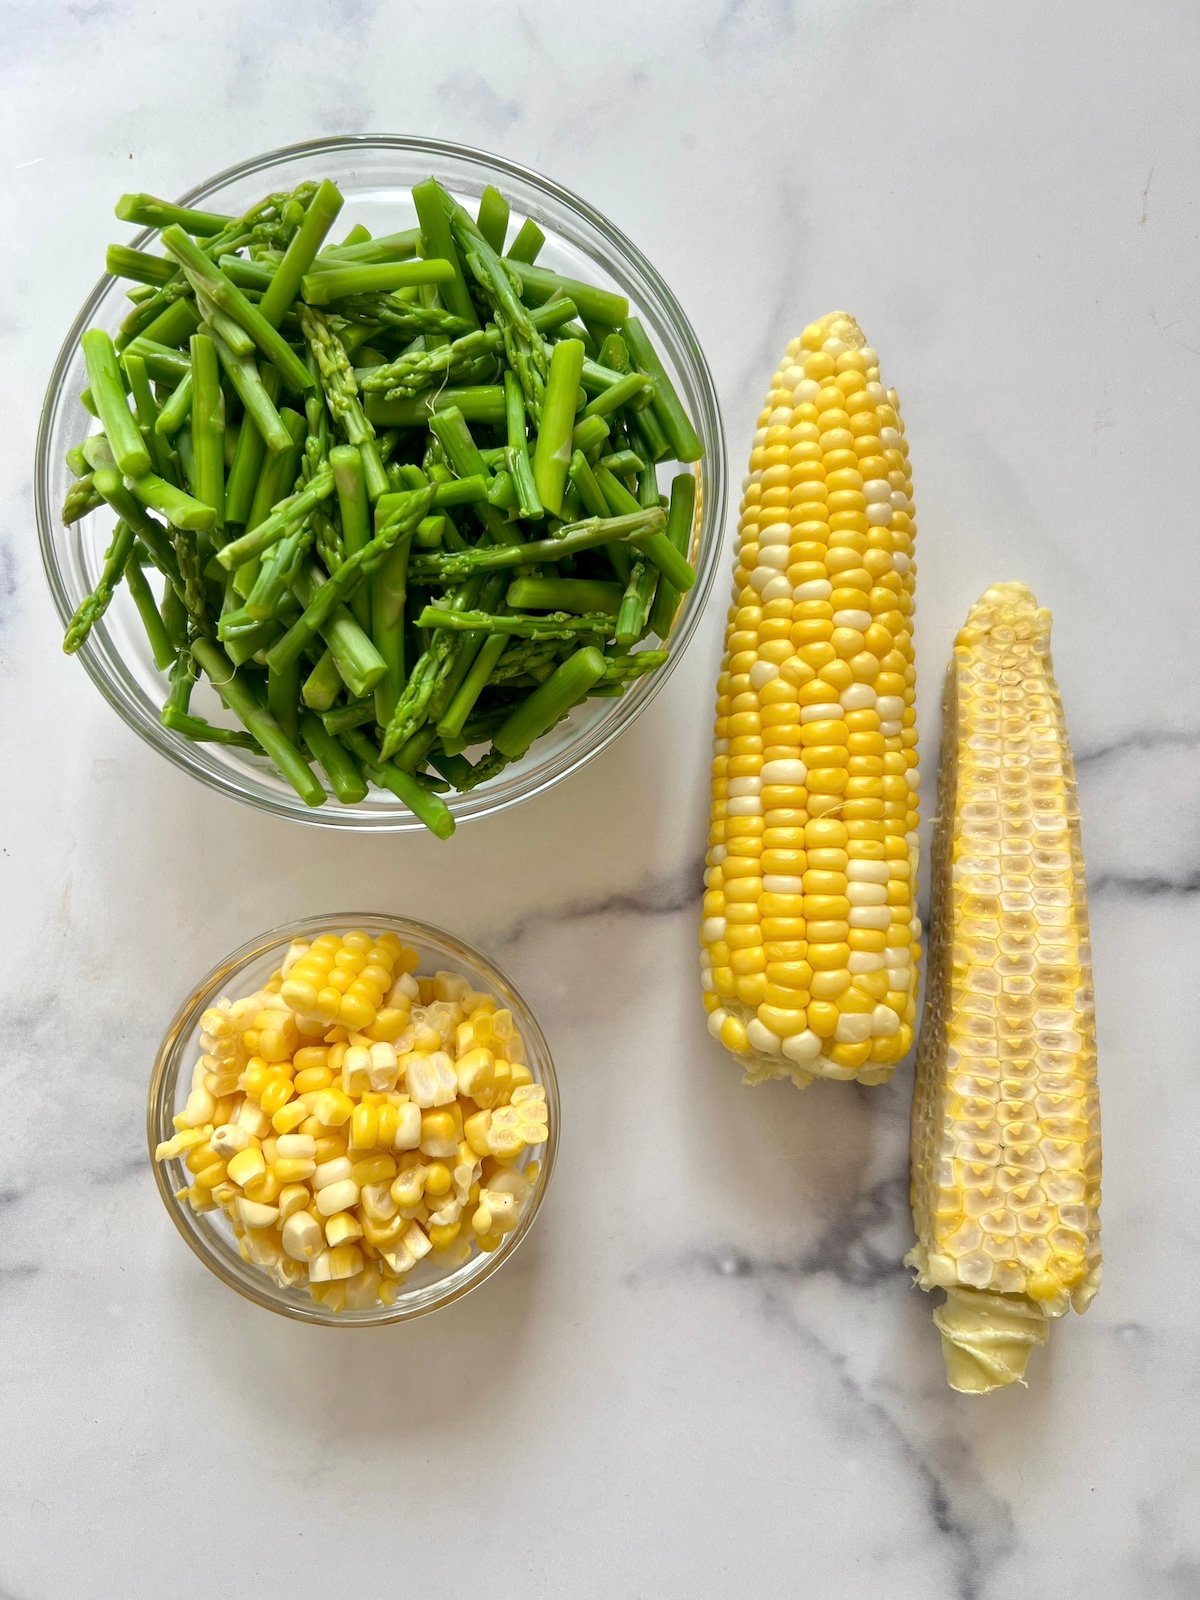 Chopped asparagus in a bowl and corn off the cob in a bowl.